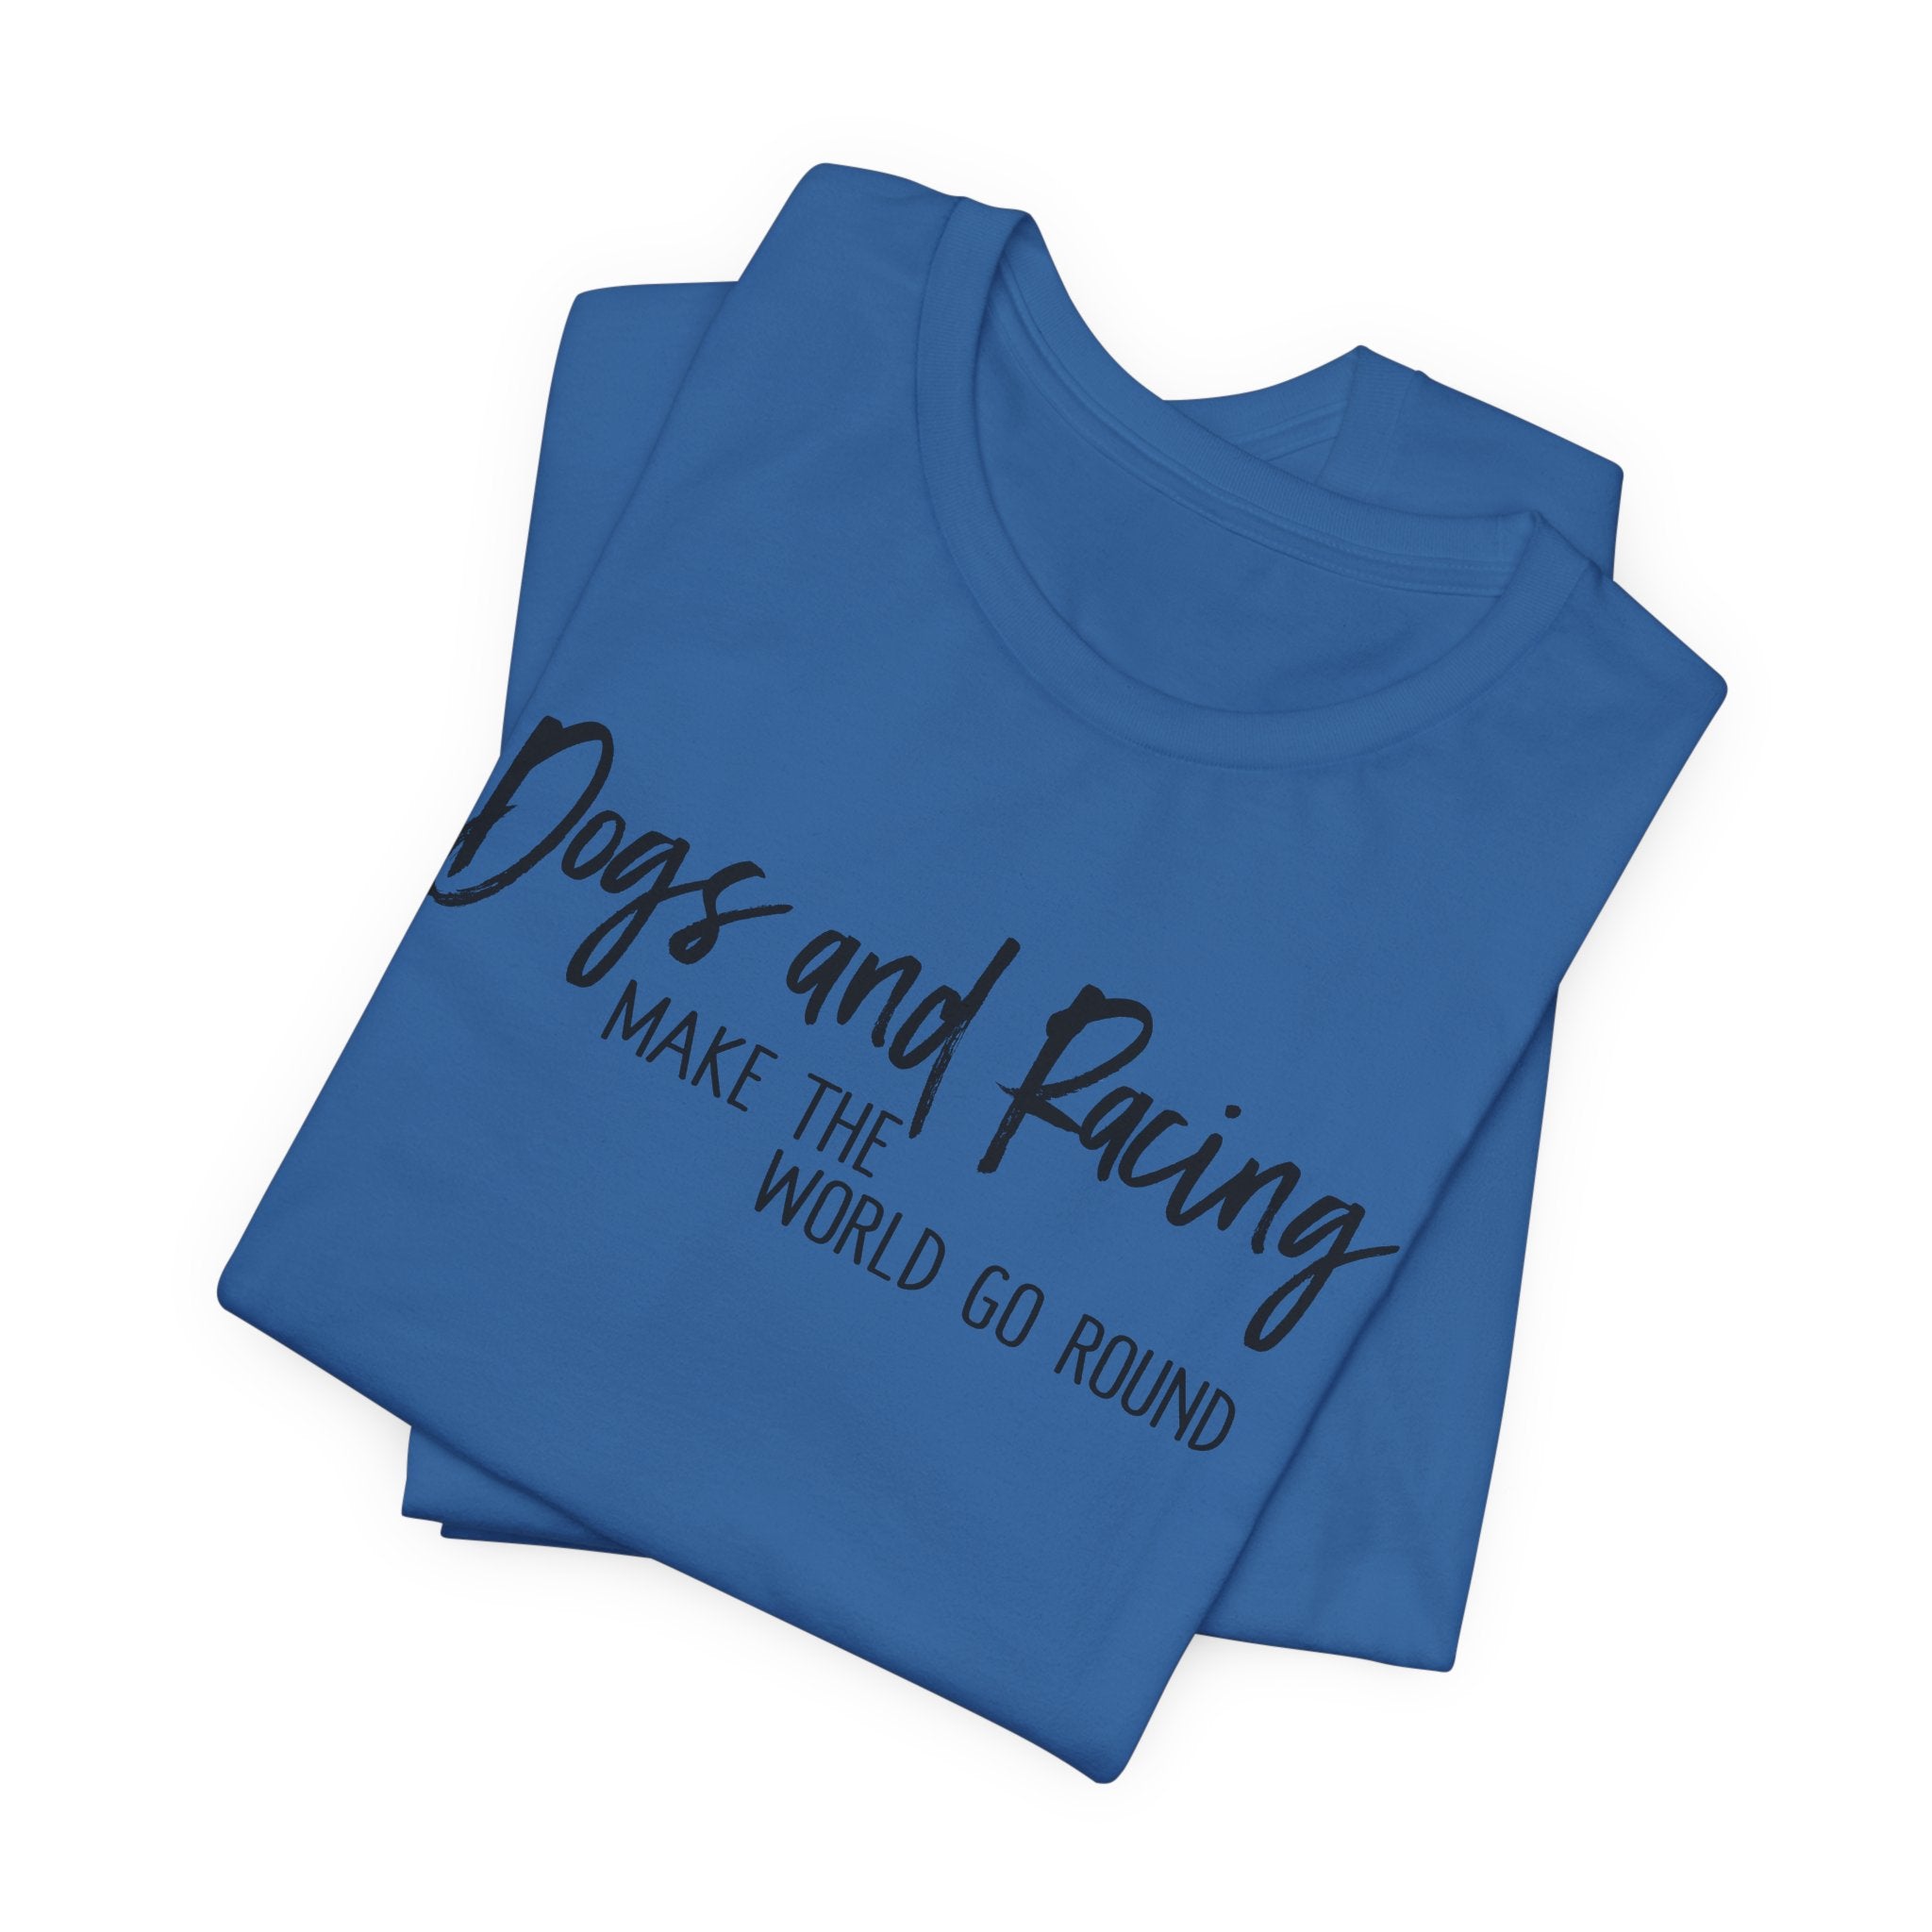 Dogs and Racing Make the World Go Round Unisex Raceday T-Shirt for Racing Ladies